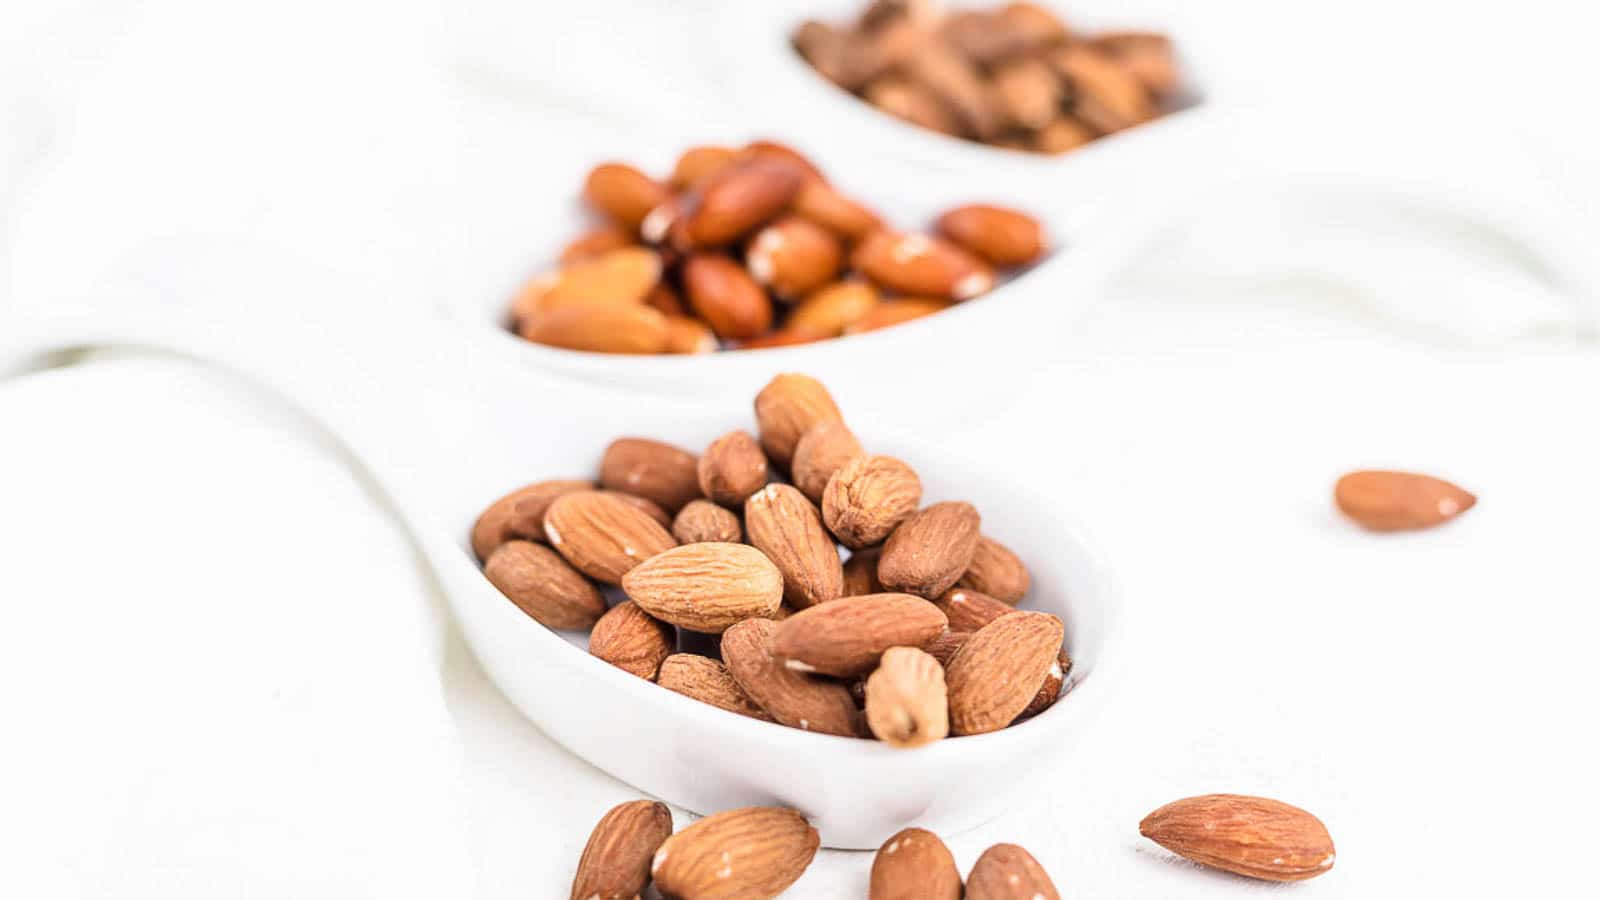 Activated Almonds inside white plates.